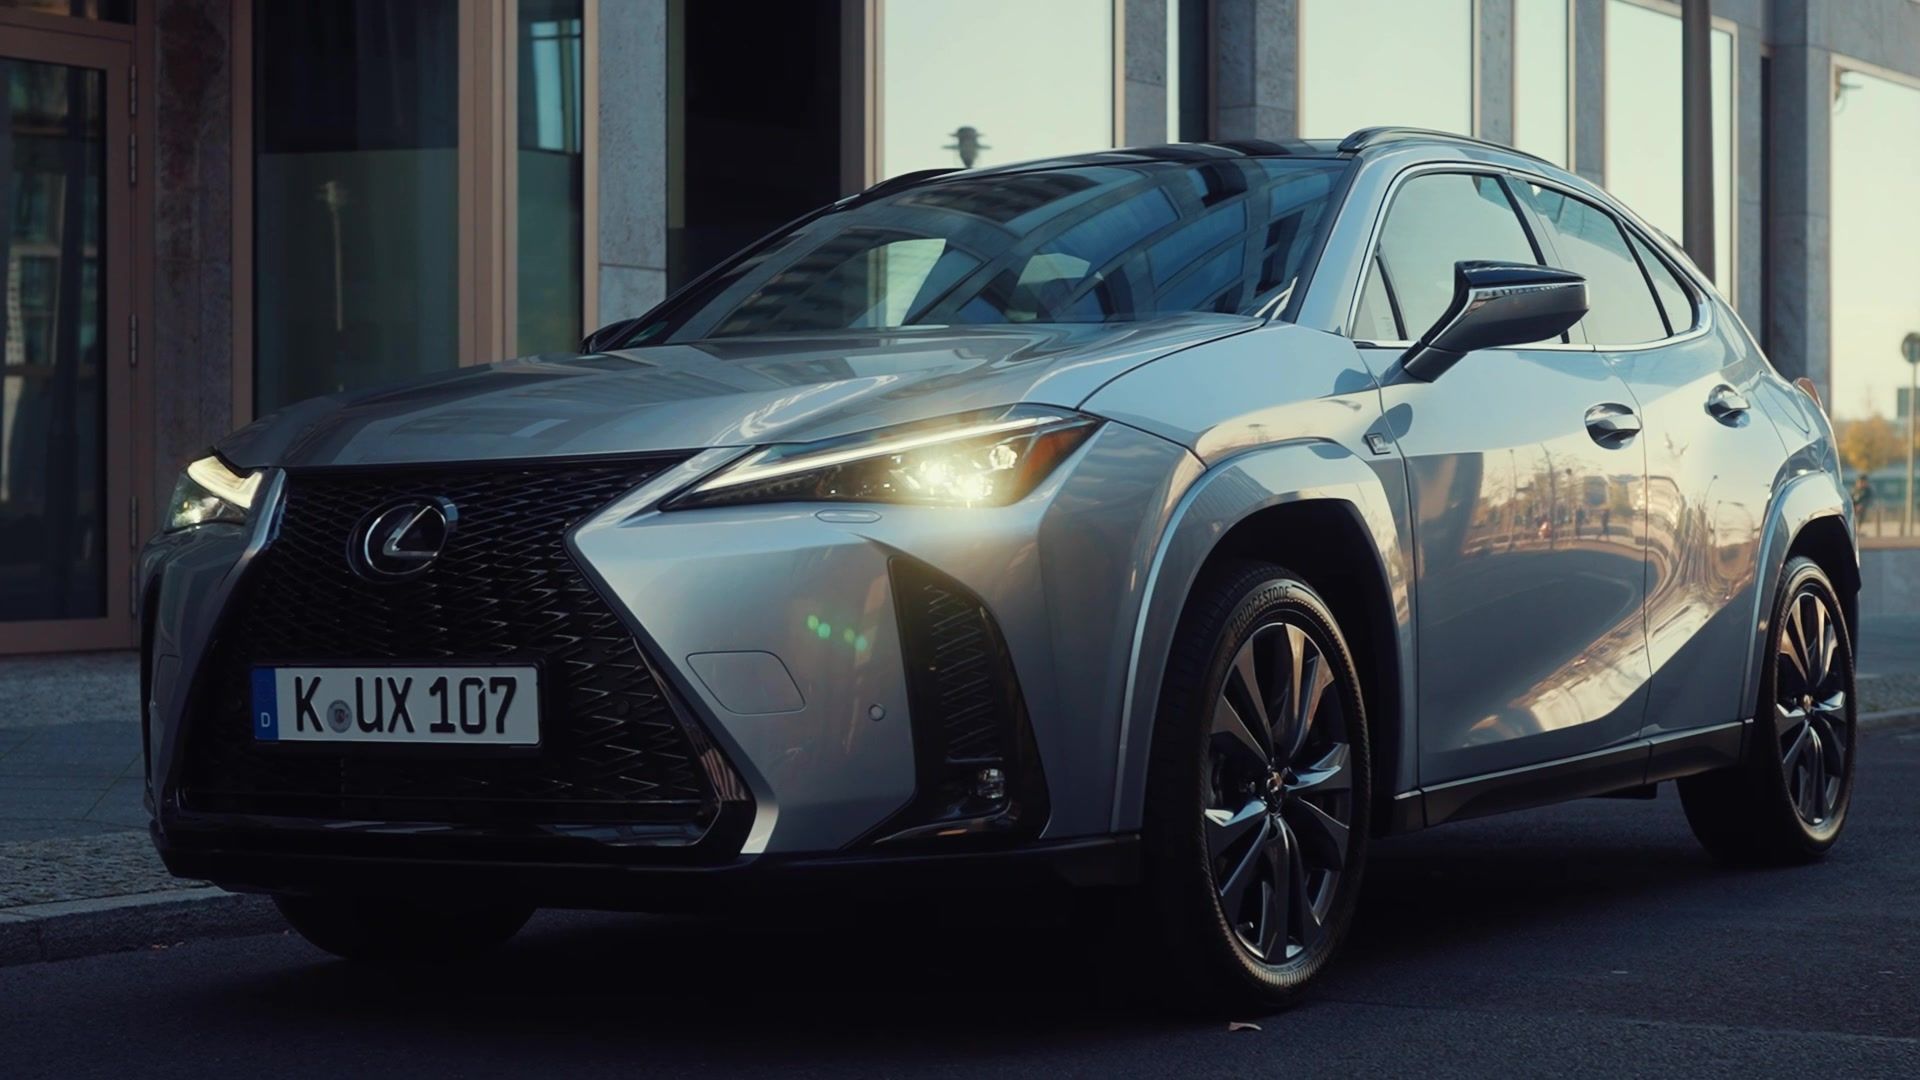 The new Lexus UX - Compact crossover comprehensively upgraded